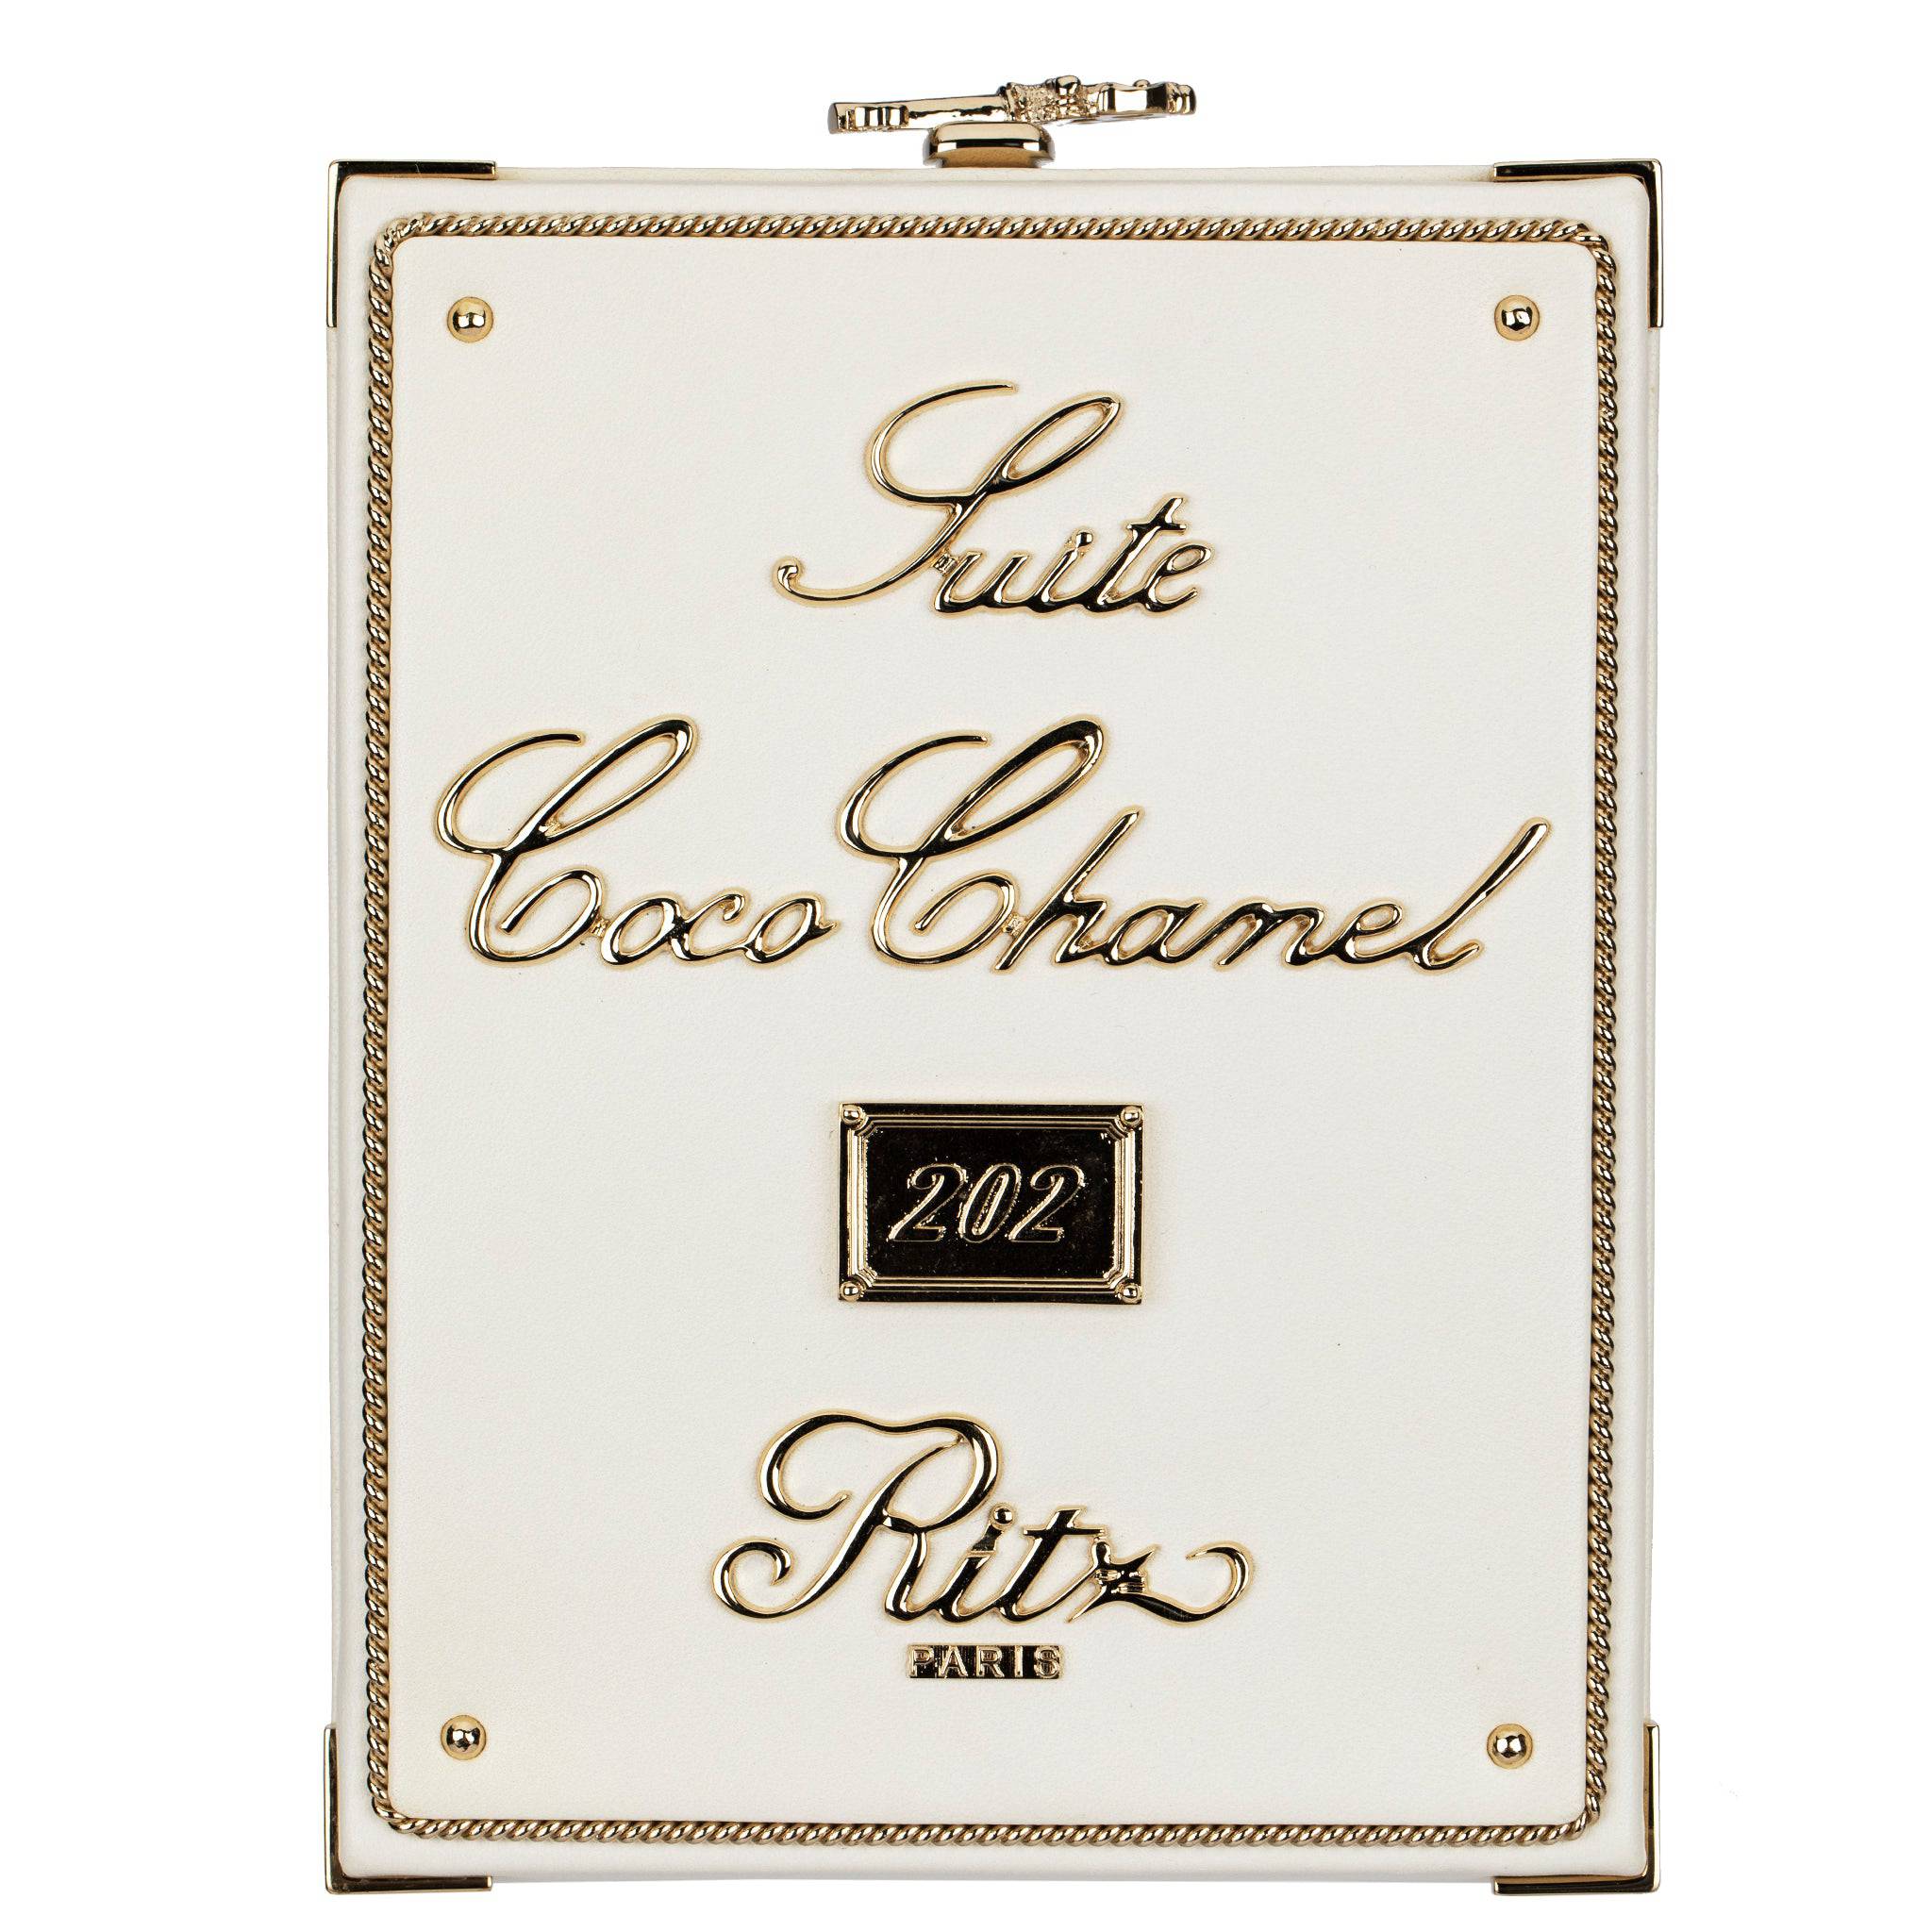 CHANEL MINAUDIÈRE LIMITED EDITION CHANEL COCO CHANEL SUITE 202 RITZ PARIS GOLD-TONE HARDWARE - On Repeat